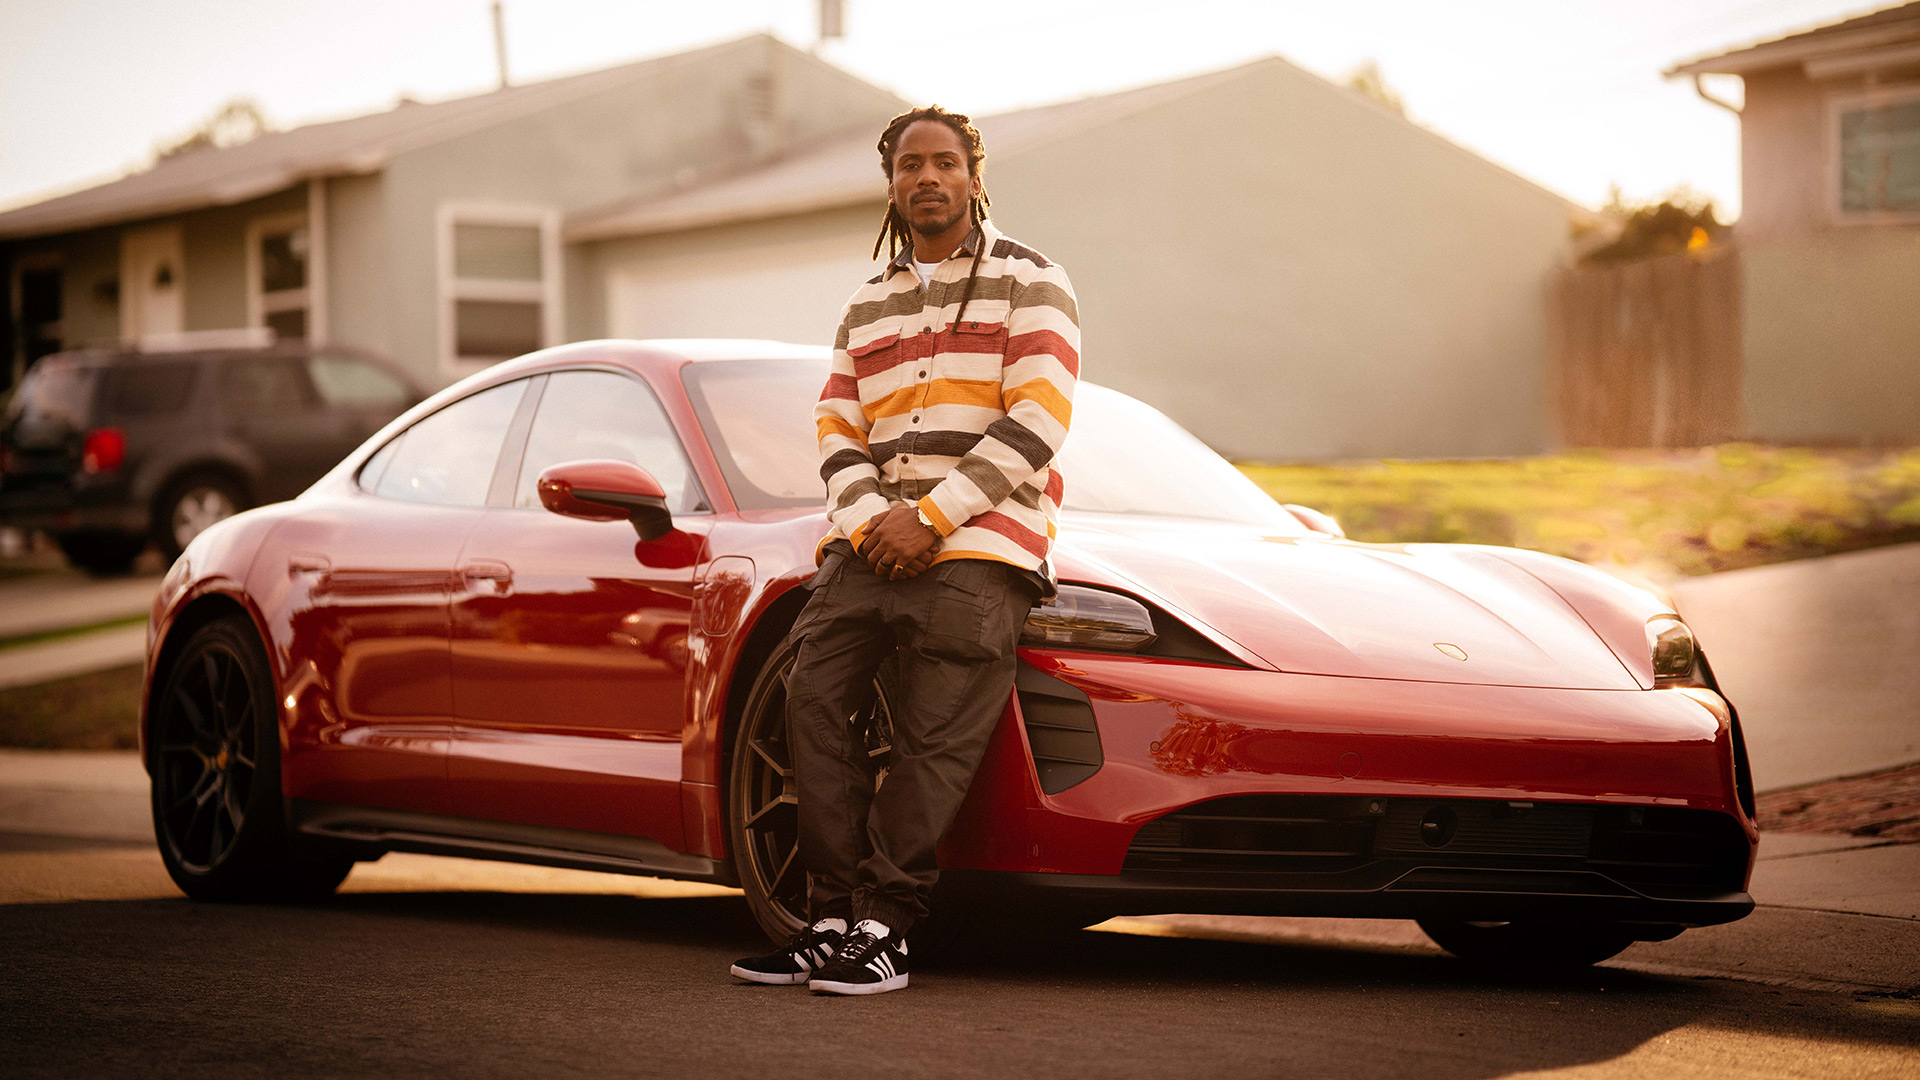 Porsche, Backspin magazine pay tribute to 50 years of hip-hop